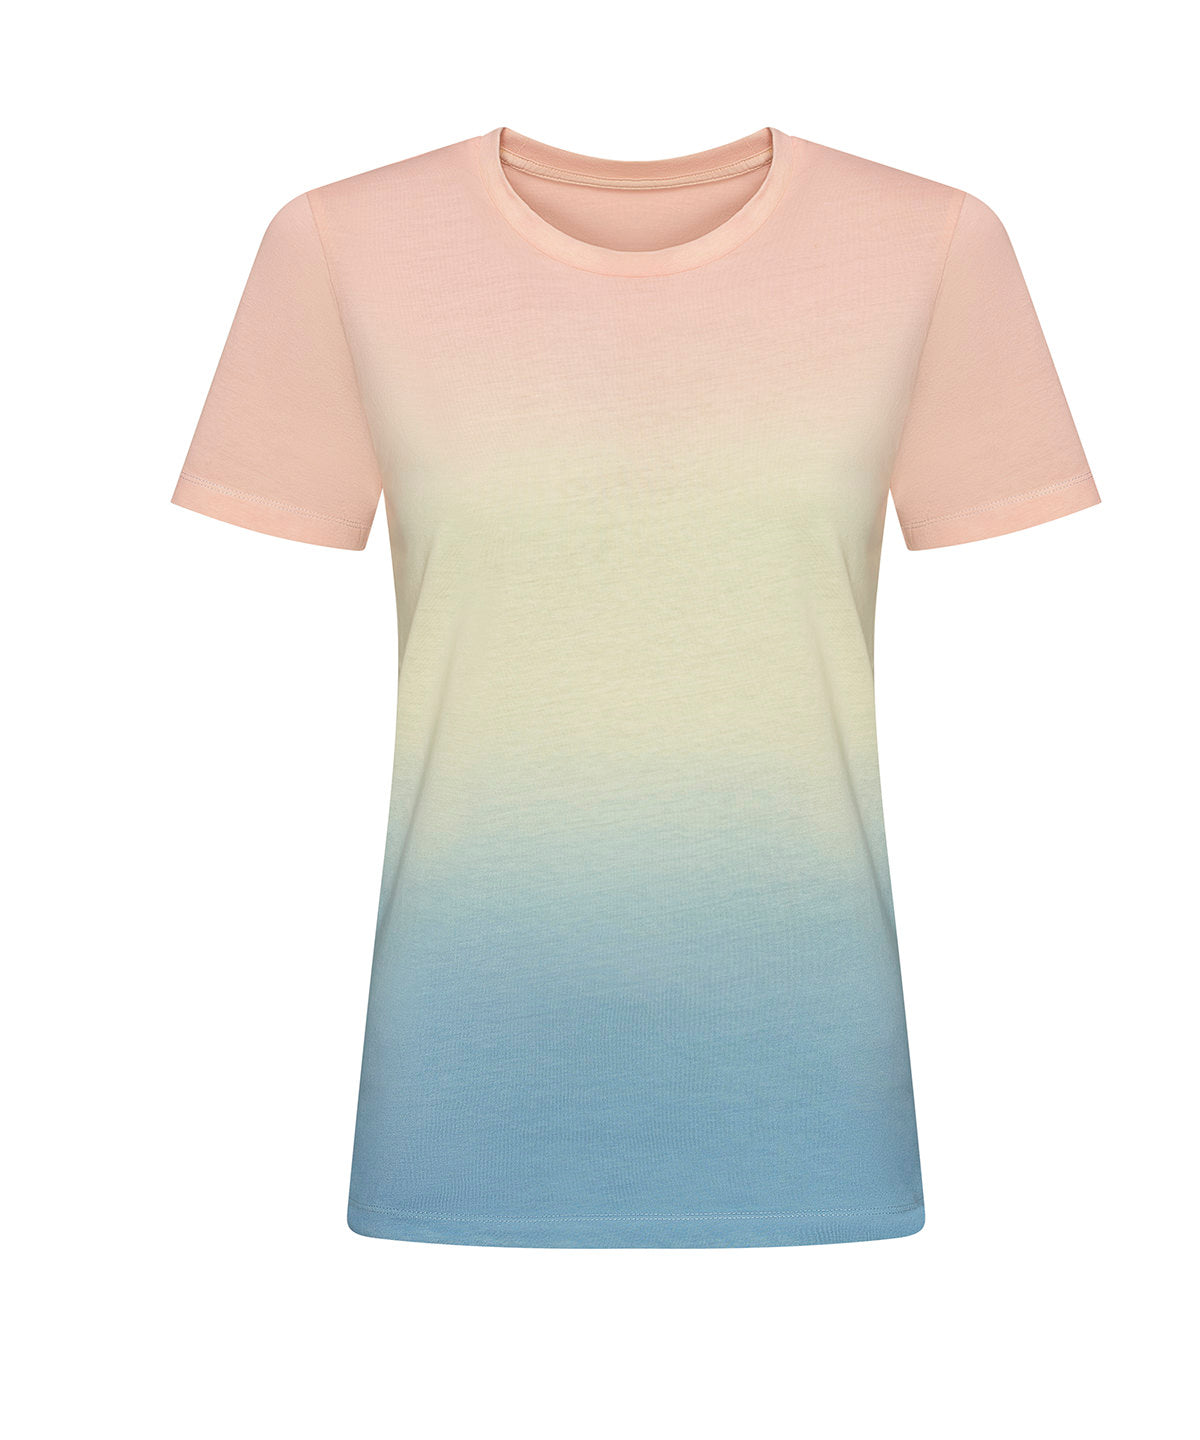 Personalised T-Shirts - Light Blue AWDis Just T's Tiedye T